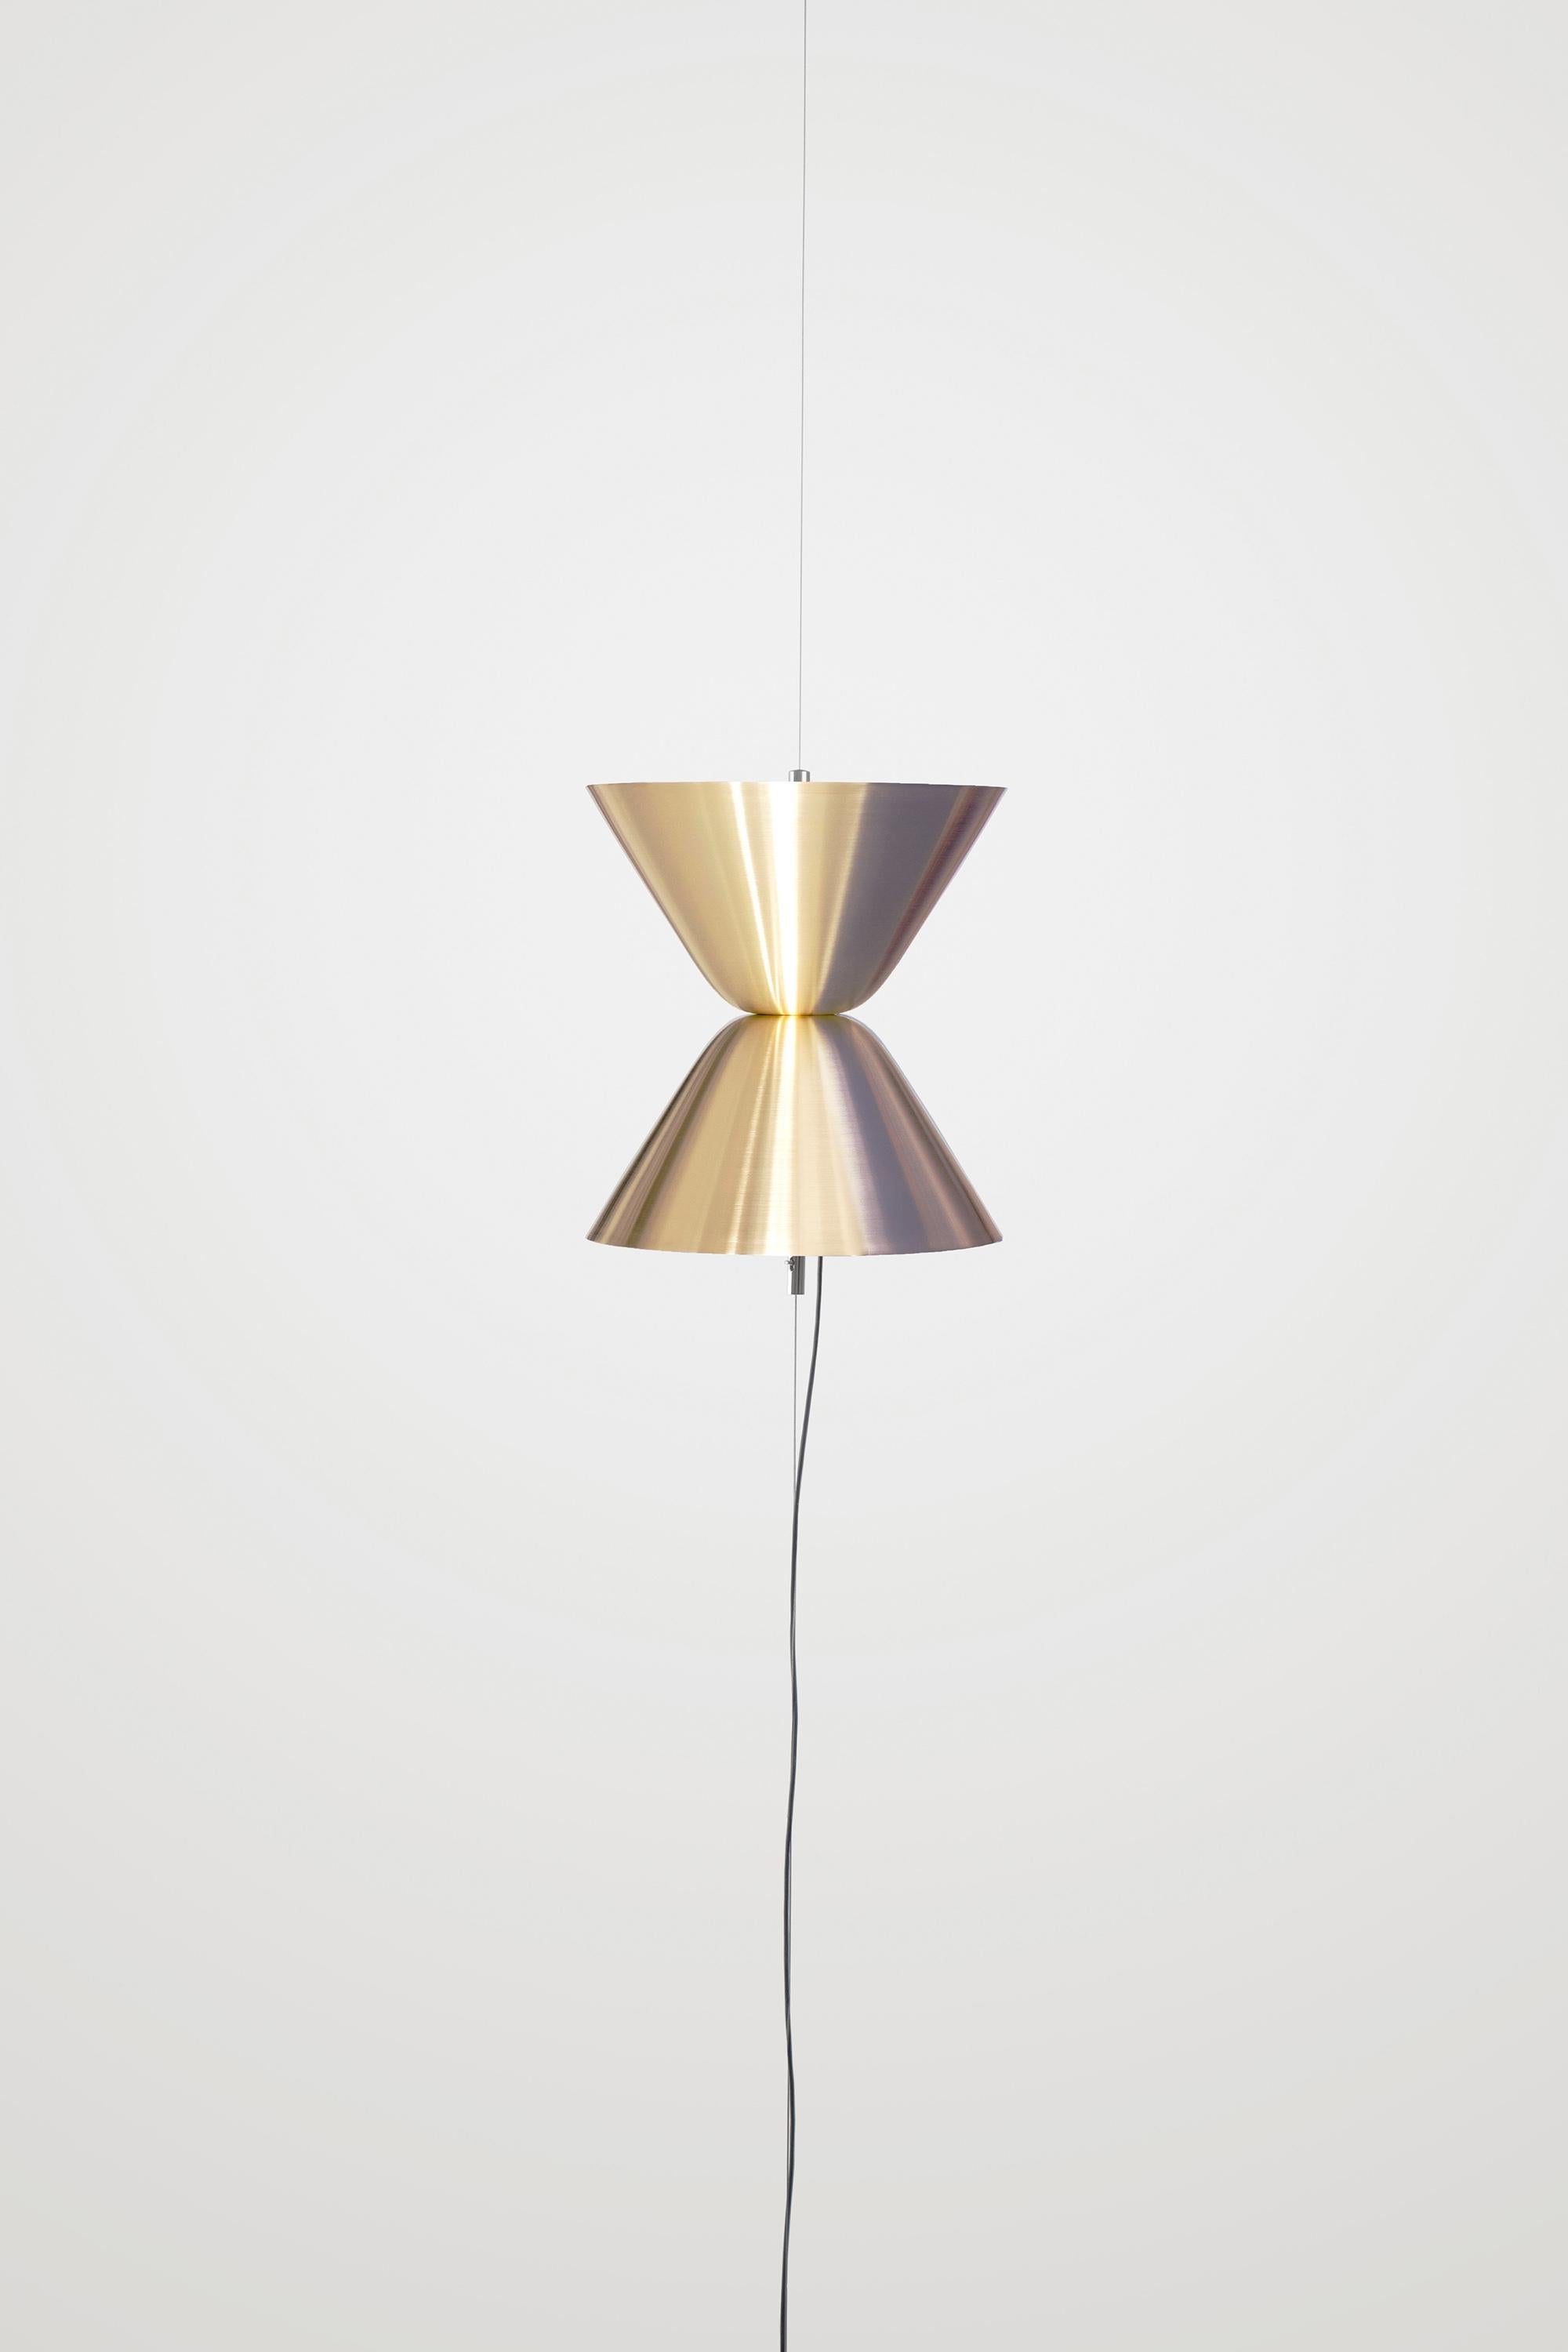 Daniel Becker 'Aureole' Suspended Floor Lamp for Moss Objects. Designed by Berlin luminary Daniel Becker and handmade to order, 'Aureole' is a highly flexible lamp that can be used as a ceiling lamp, reading lamp or floodlight. The shape of the